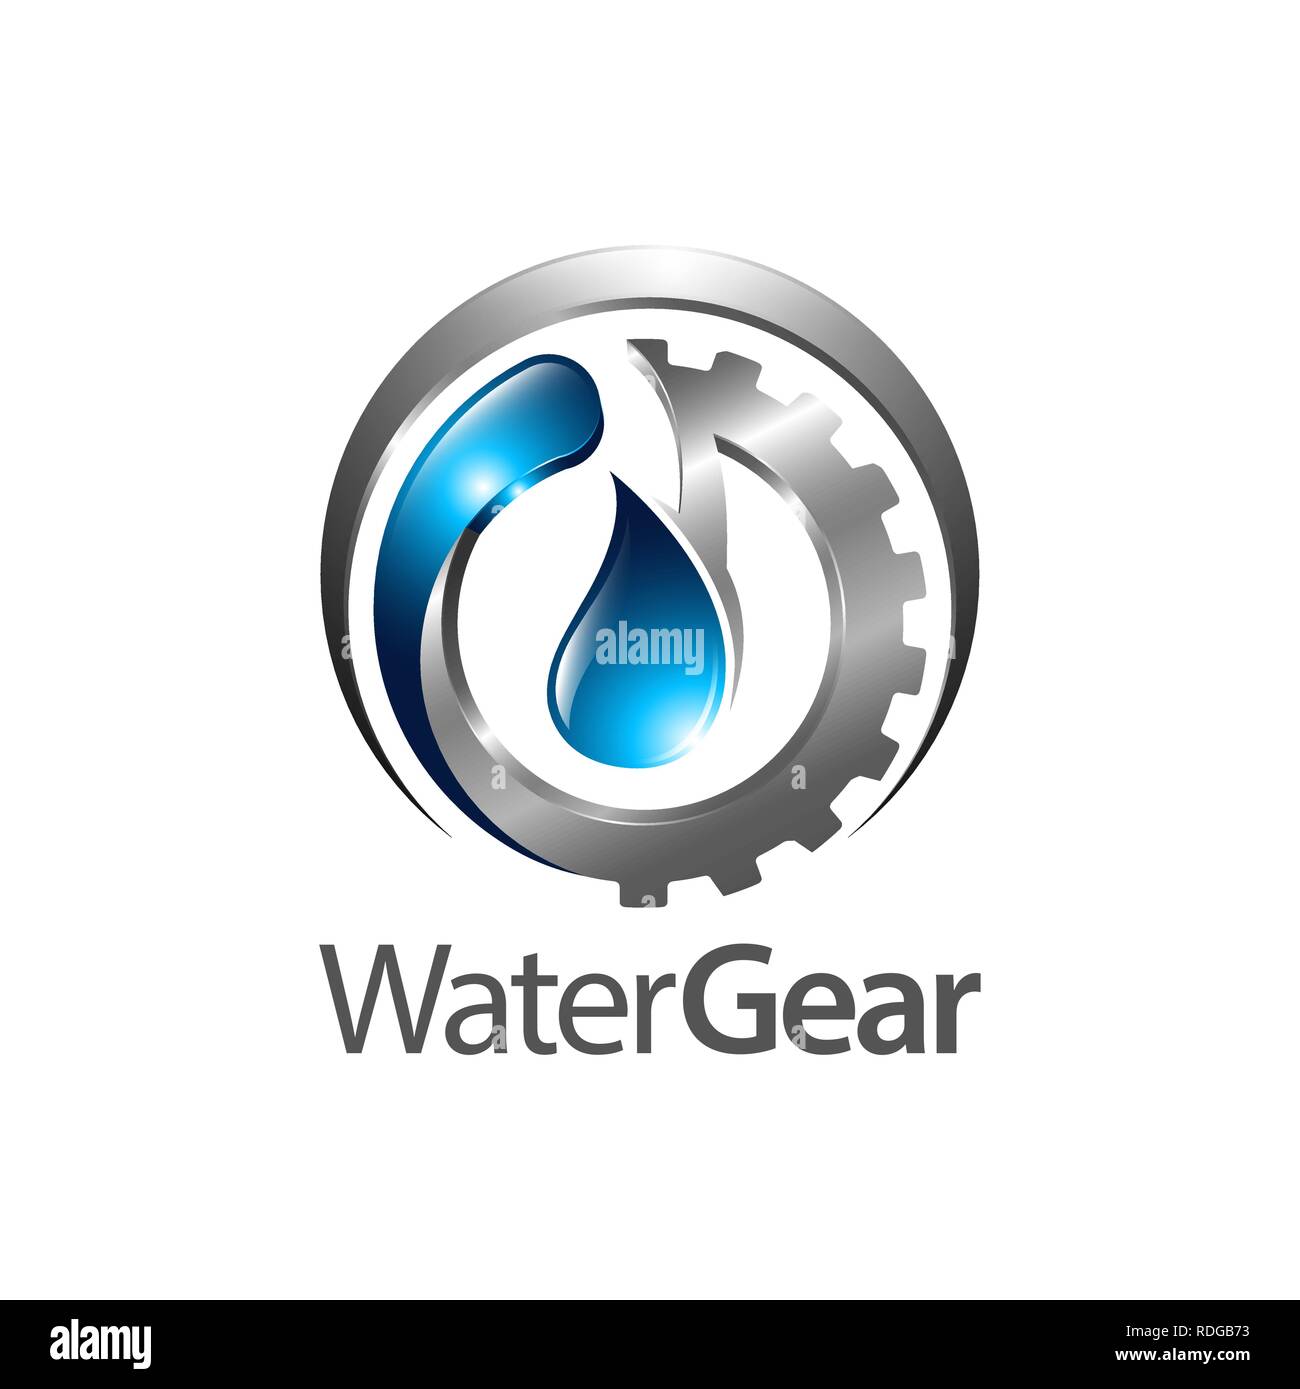 Water gear logo concept design. Three dimensional style. Symbol graphic template element vector Stock Vector